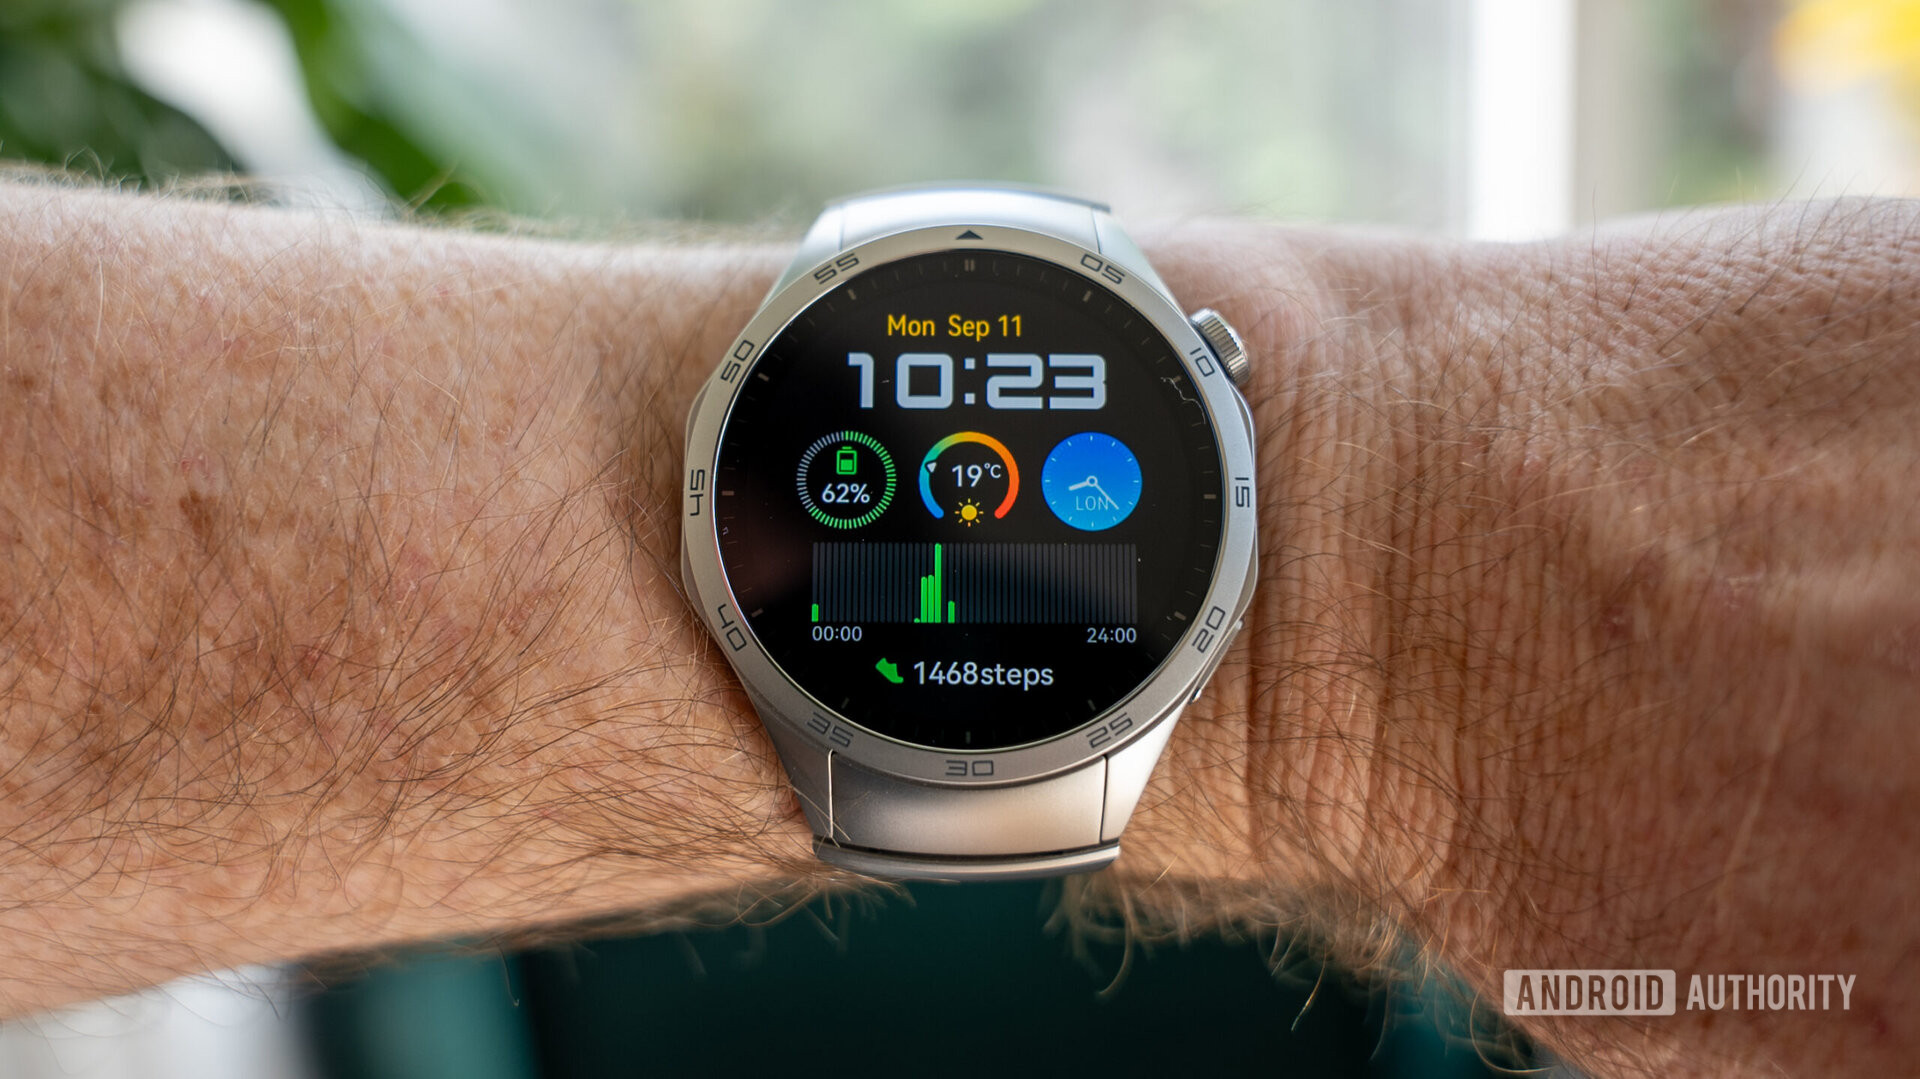 These Huawei smartwatches will receive HarmonyOS 4 in 2024 - Huawei Central